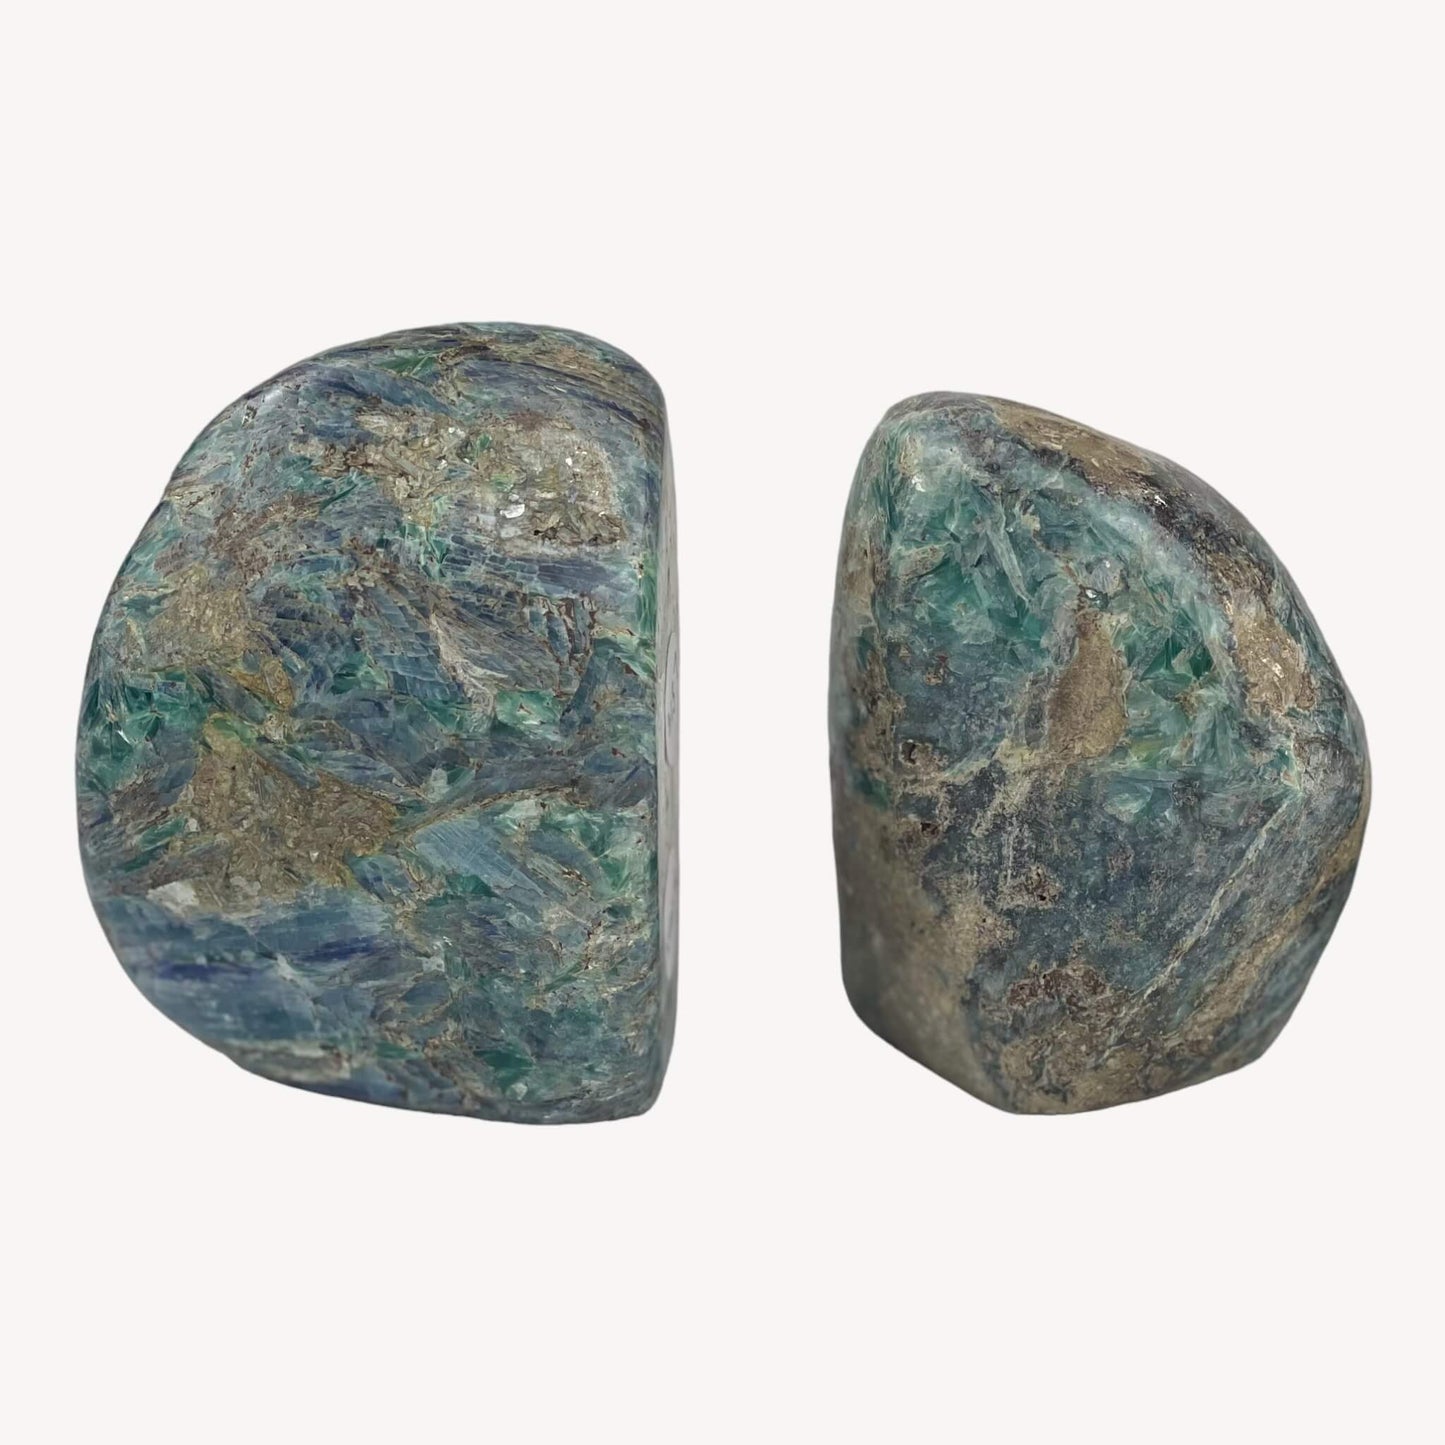 Two Polished Kyanite pieces showcased together in a single image. The vibrant blue hues and polished surfaces highlight the natural beauty of these crystals, perfect for spiritual and calming energies